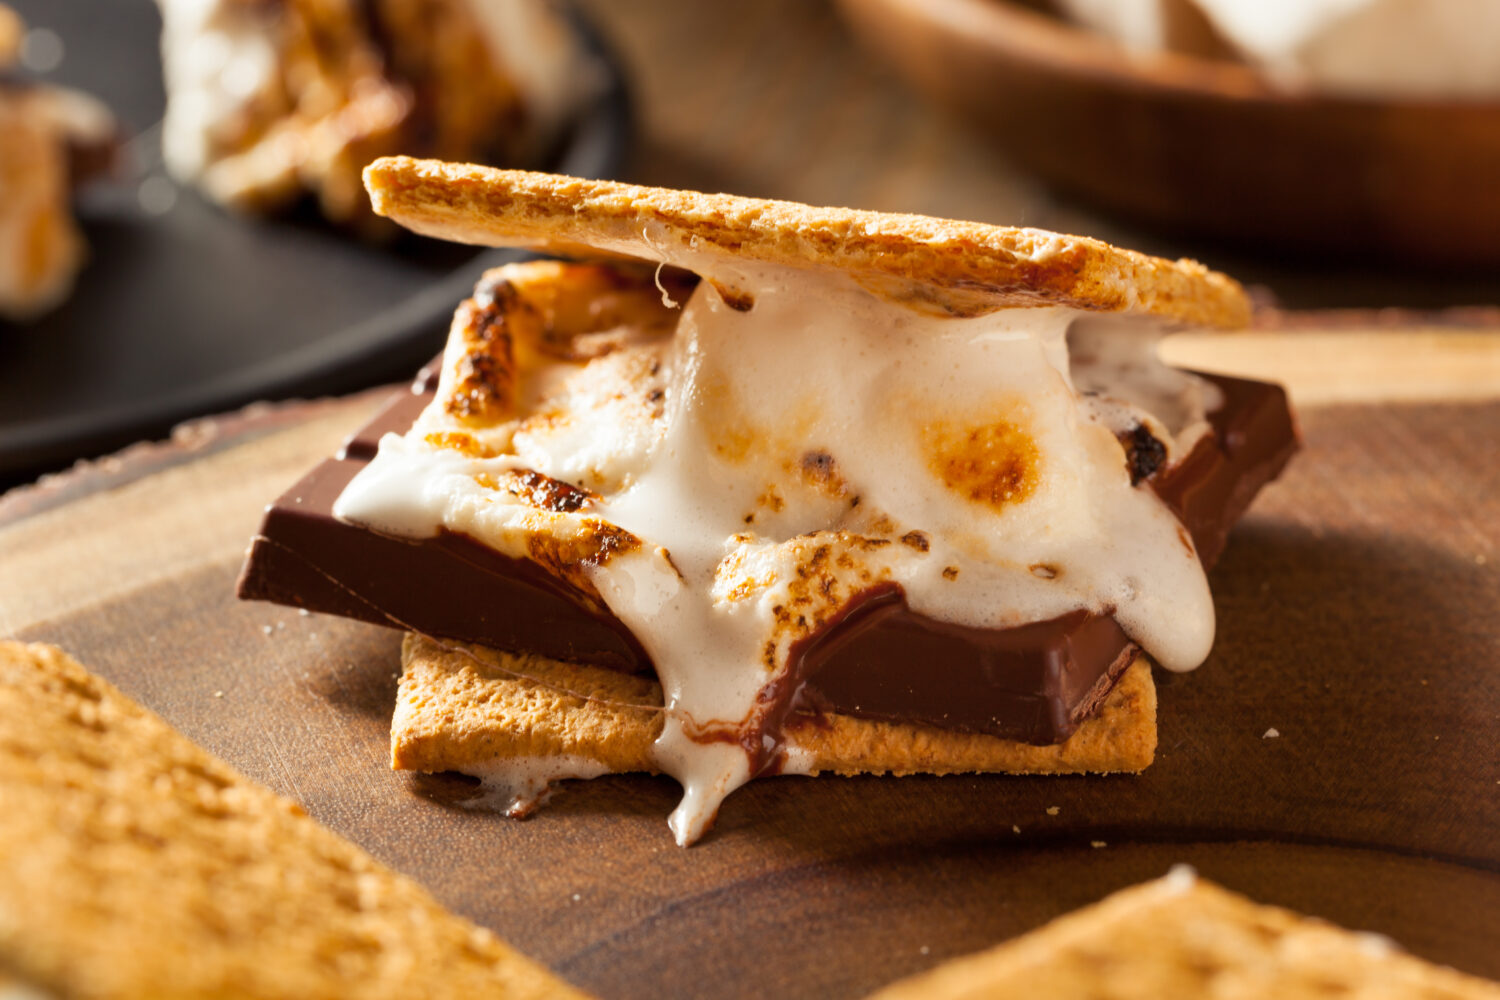 Homemade Gooey Marshmallow S'mores with Chocolate